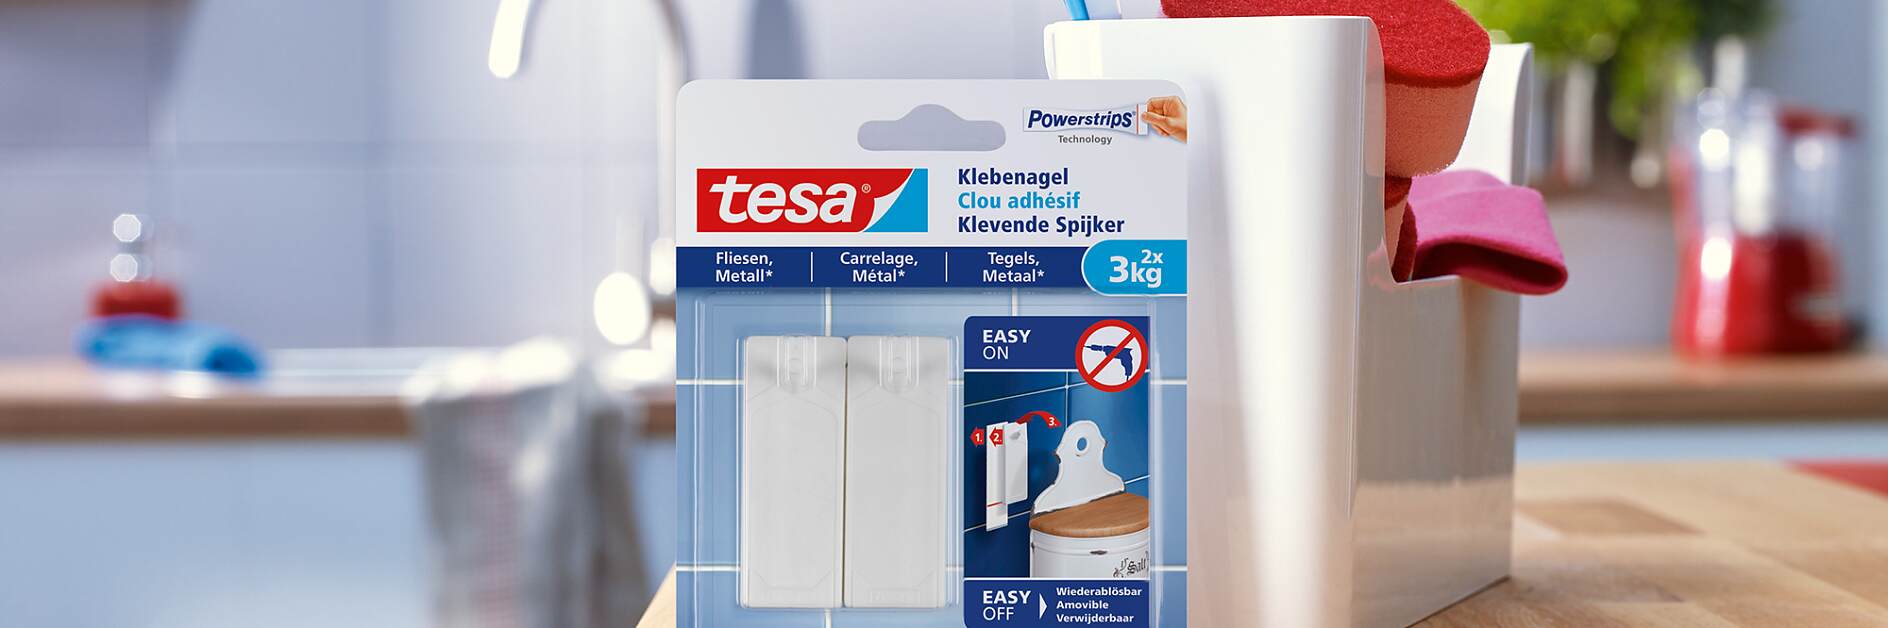 How to use the tesa® Adhesive Nail for Tiles & Metal 3kg.